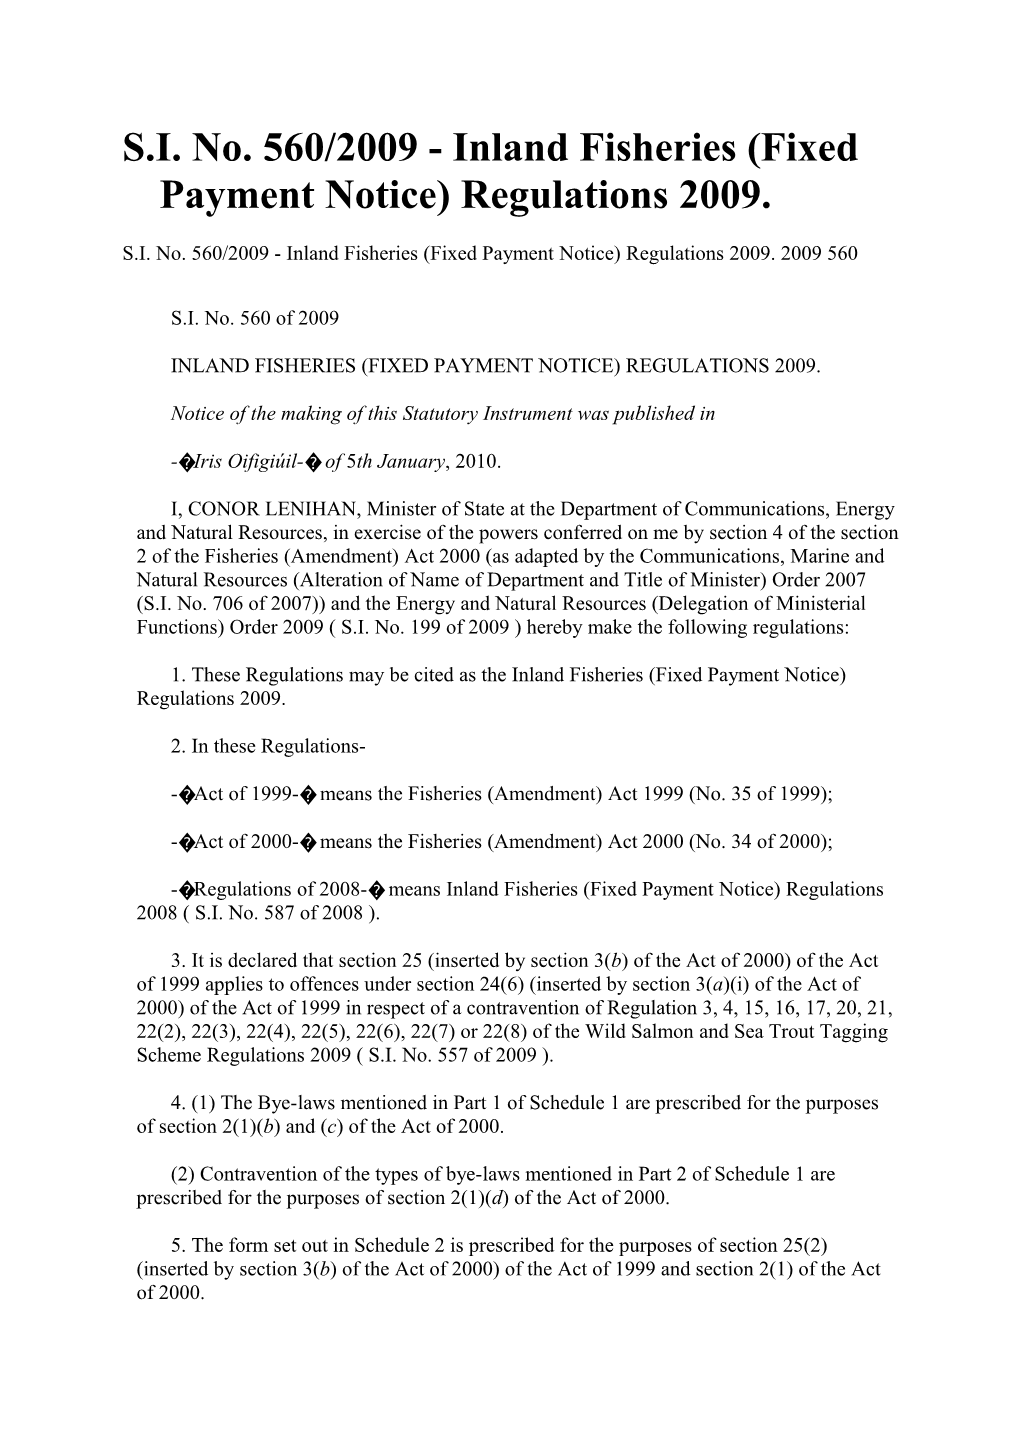 S.I. No. 560/2009 - Inland Fisheries (Fixed Payment Notice) Regulations 2009